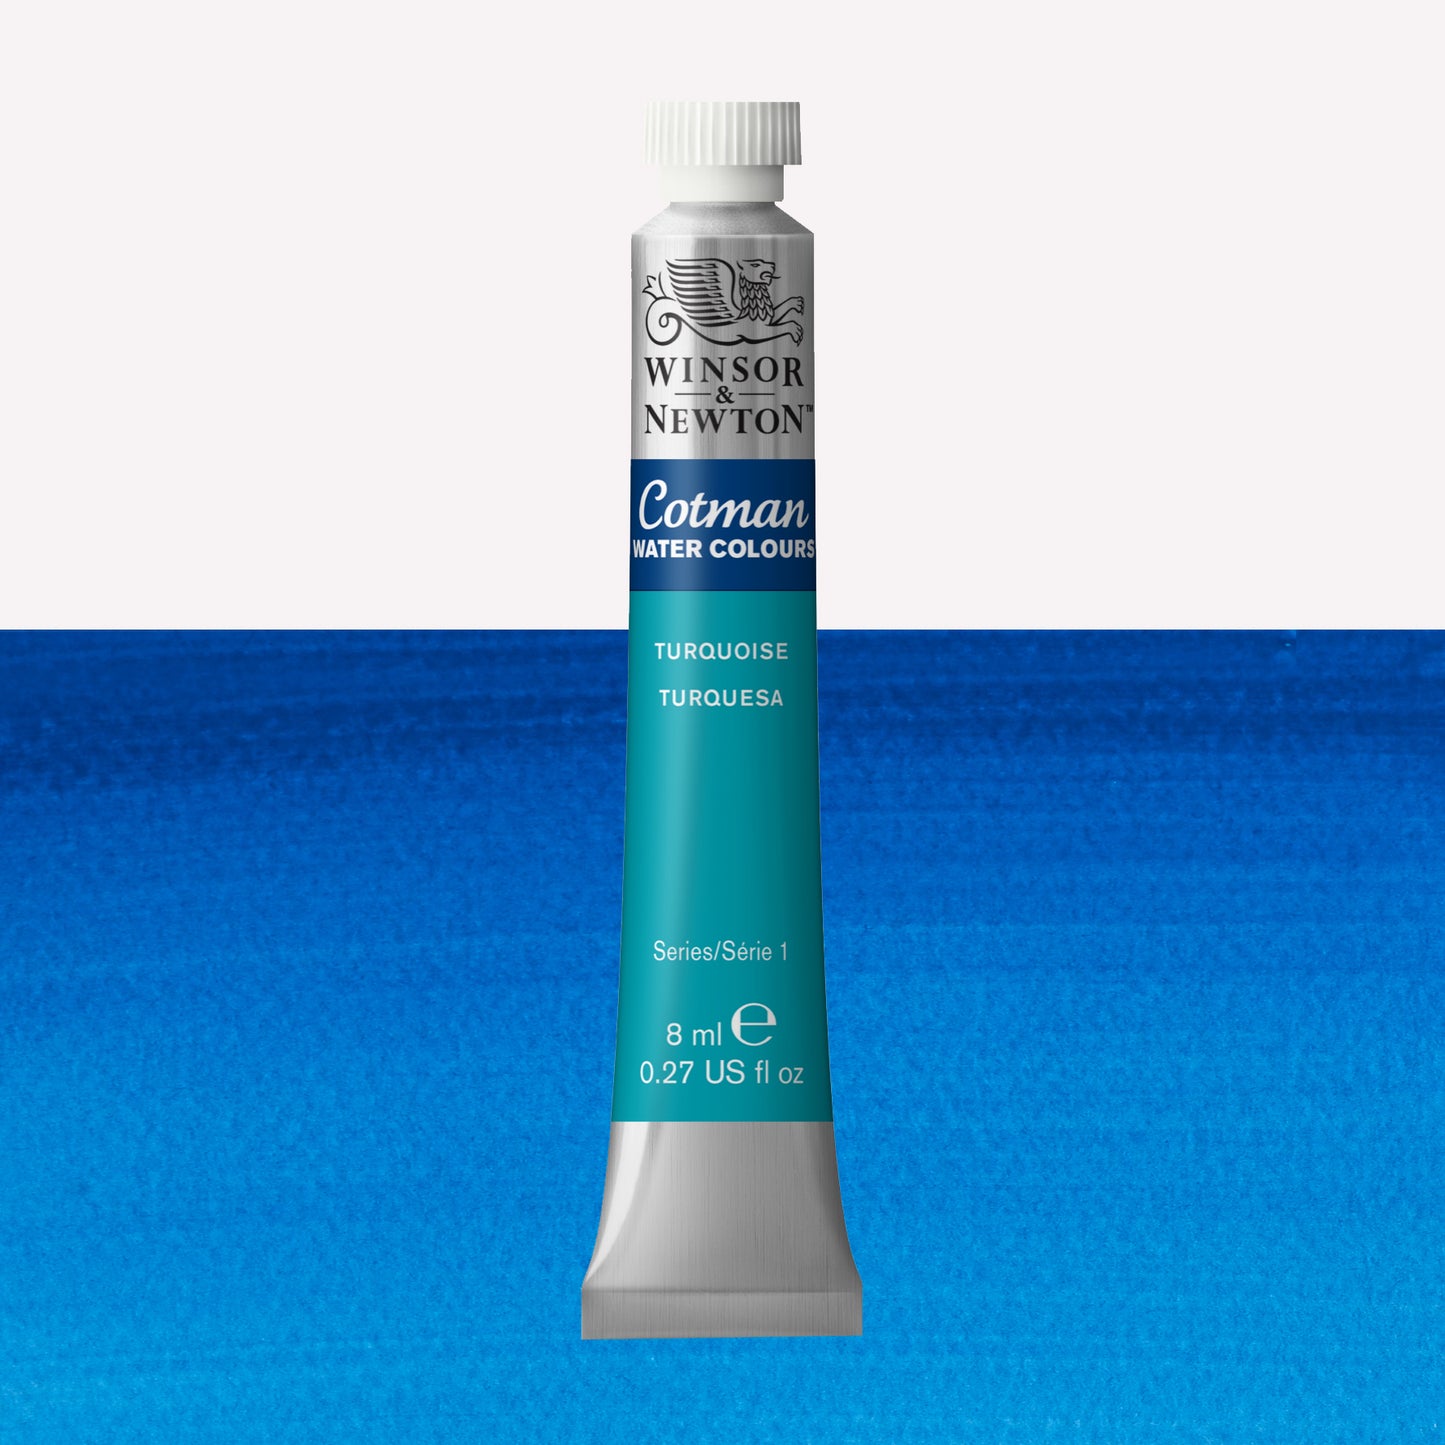 Winsor & Newton Cotman watercolour paint packaged in 8ml silver tubes with a white lid in the shade Turquoise over a highly pigmented colour swatch.